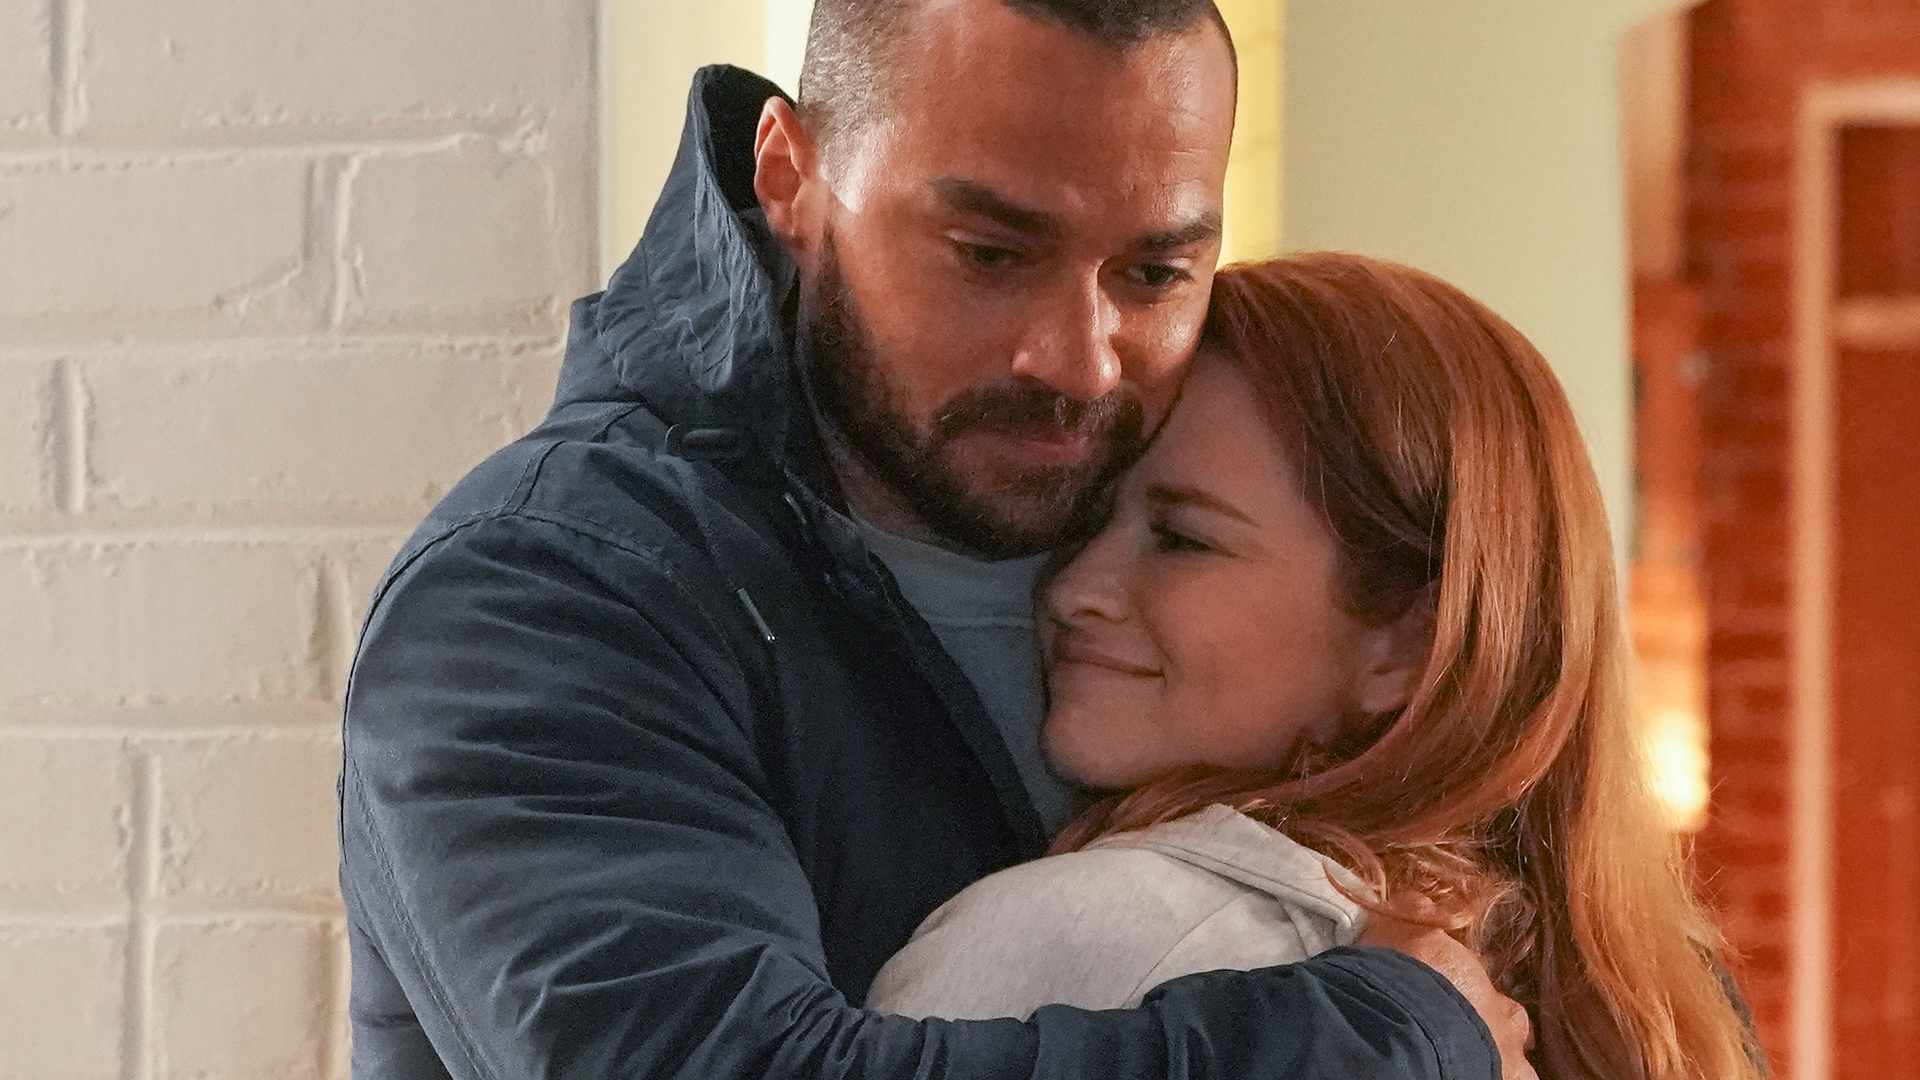 Jesse Williams as Jackson Avery and Sarah Drew as April Kepner hugging each other in ‘Grey’s Anatomy’ Season 17 Episode 14, ‘Look Up Child’